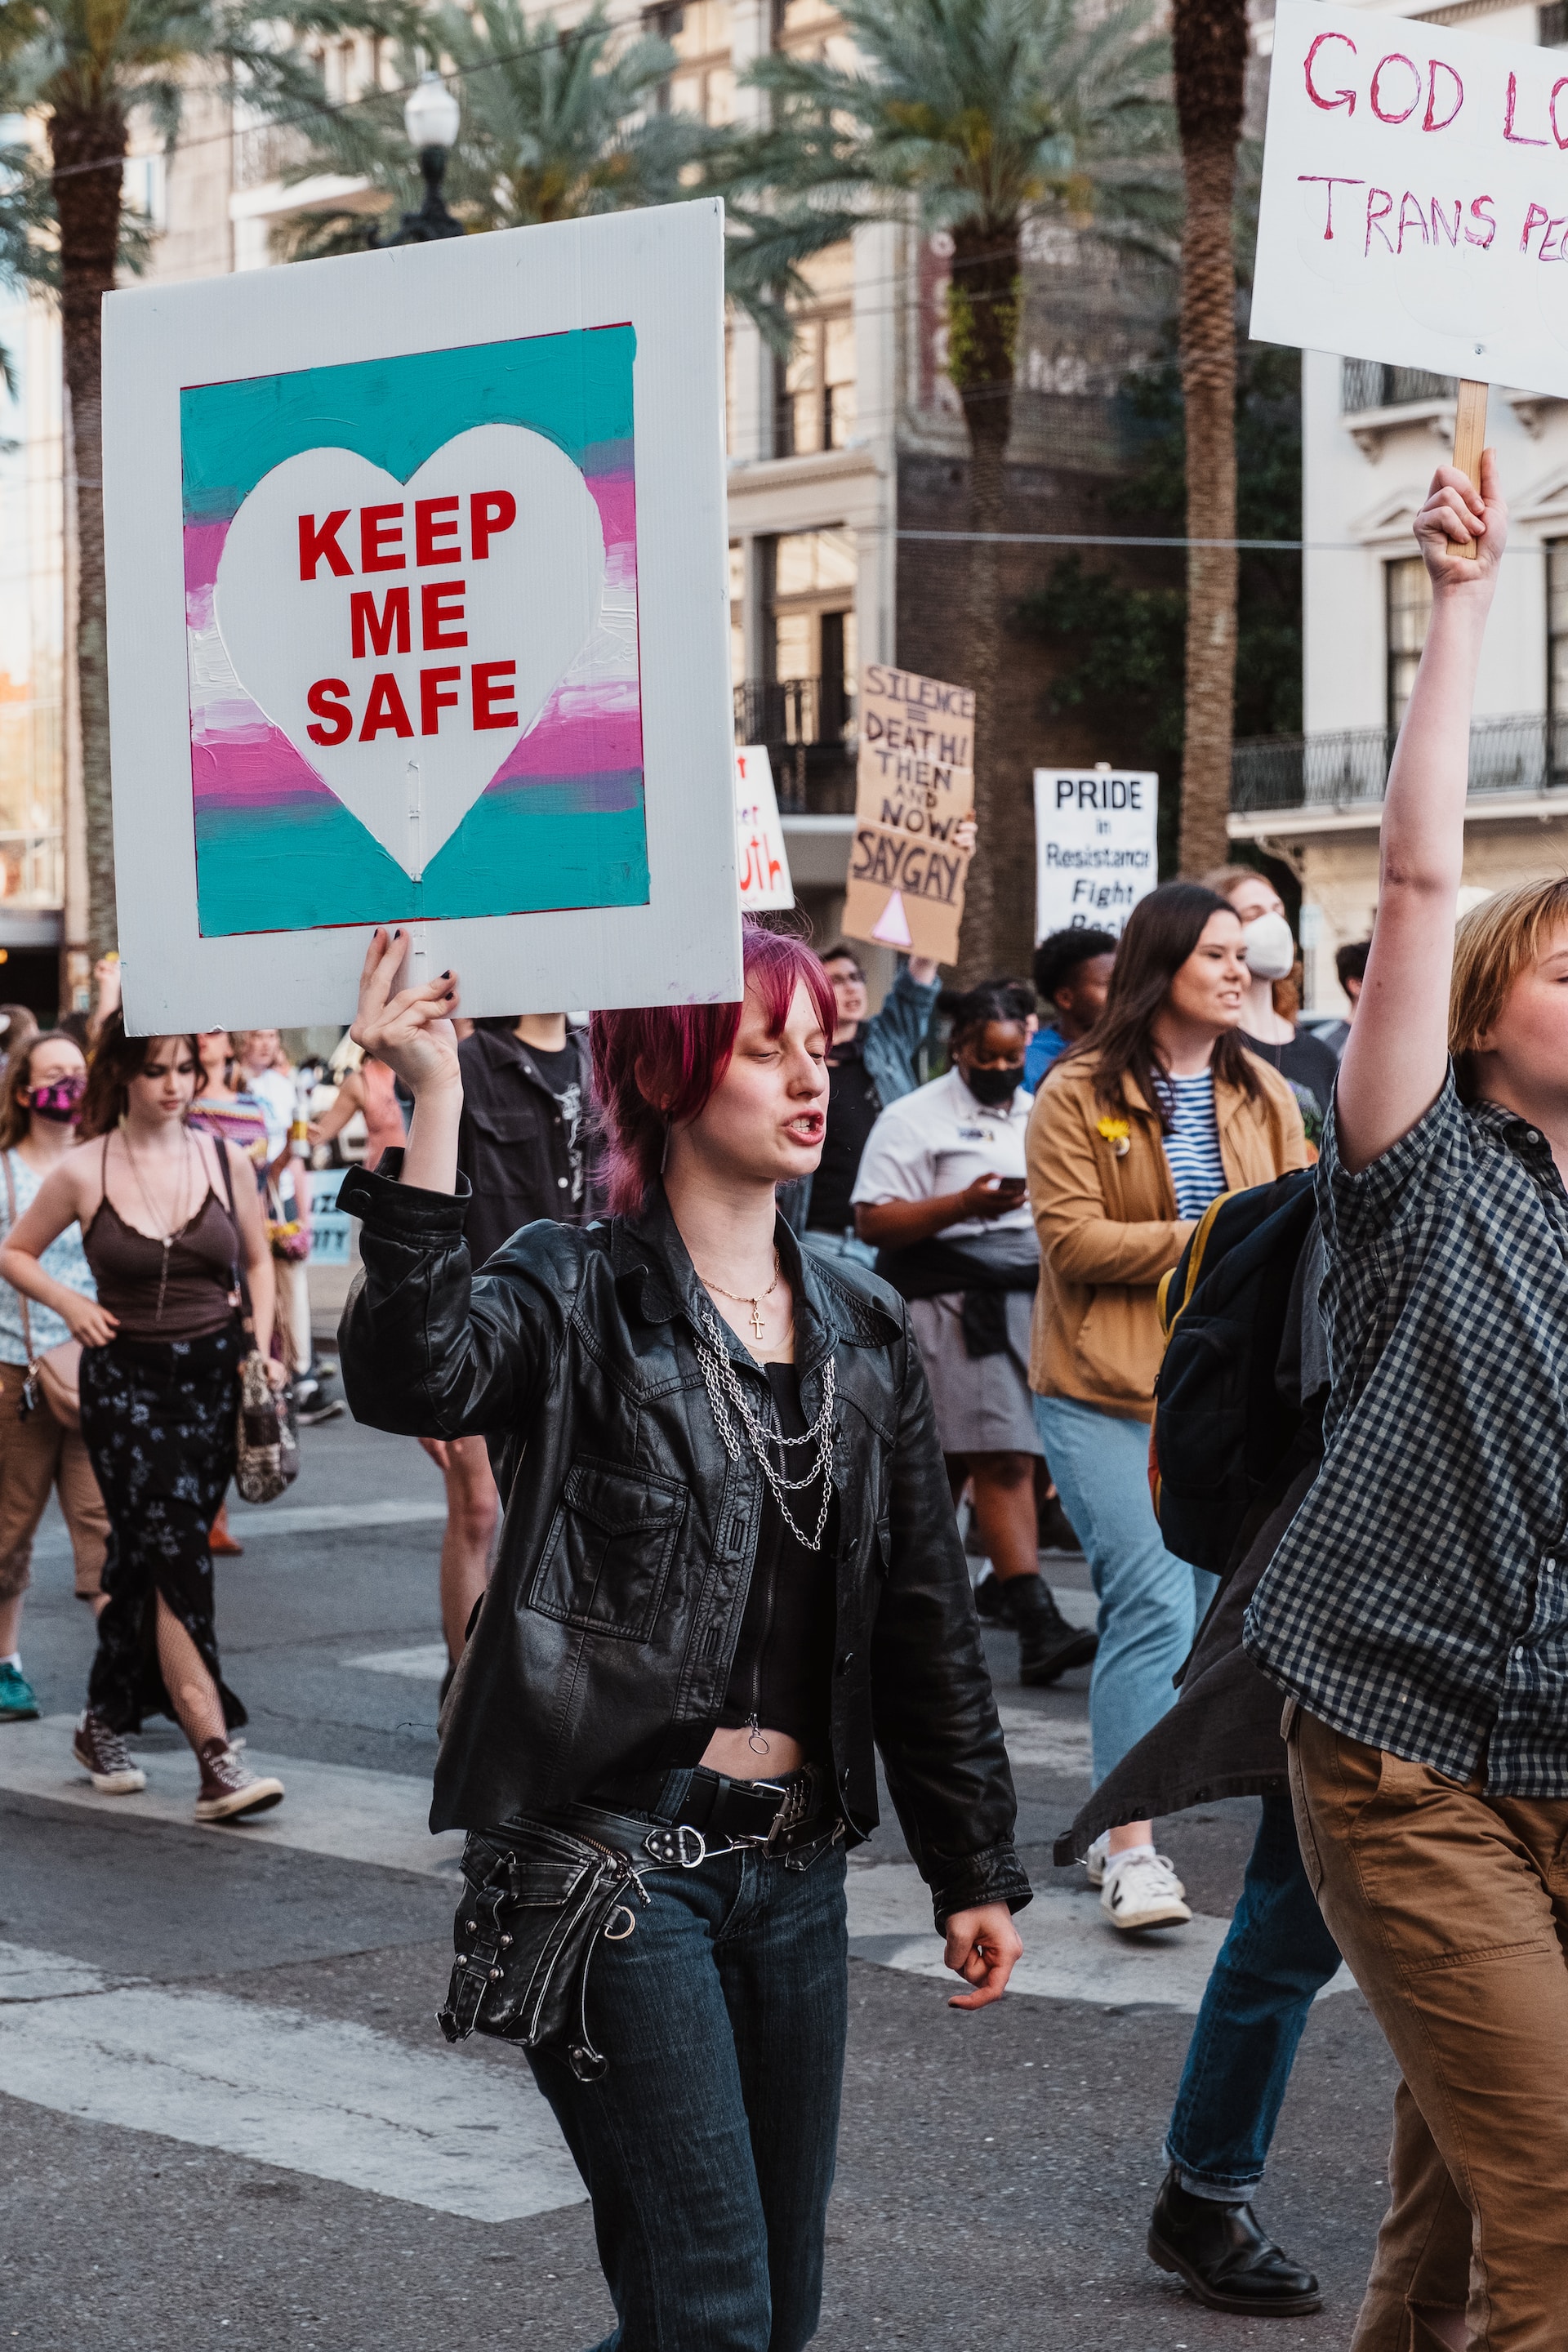 A photo of a crowd of people marching down the street holding signs: one reads, Keep me Safe, and another reads, God loves Trans people.